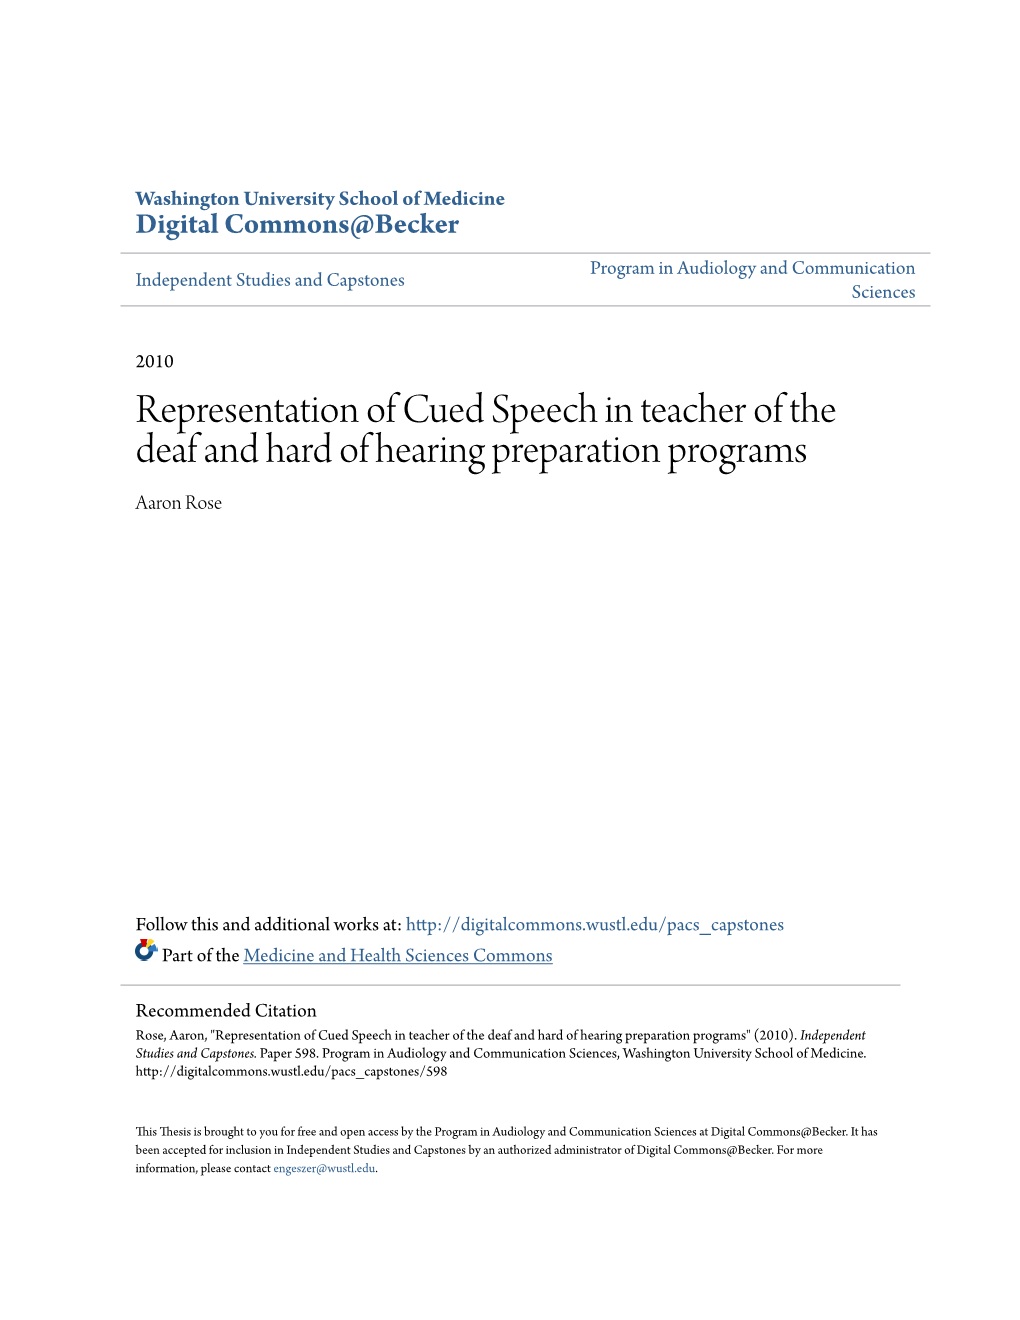 Representation of Cued Speech in Teacher of the Deaf and Hard of Hearing Preparation Programs Aaron Rose